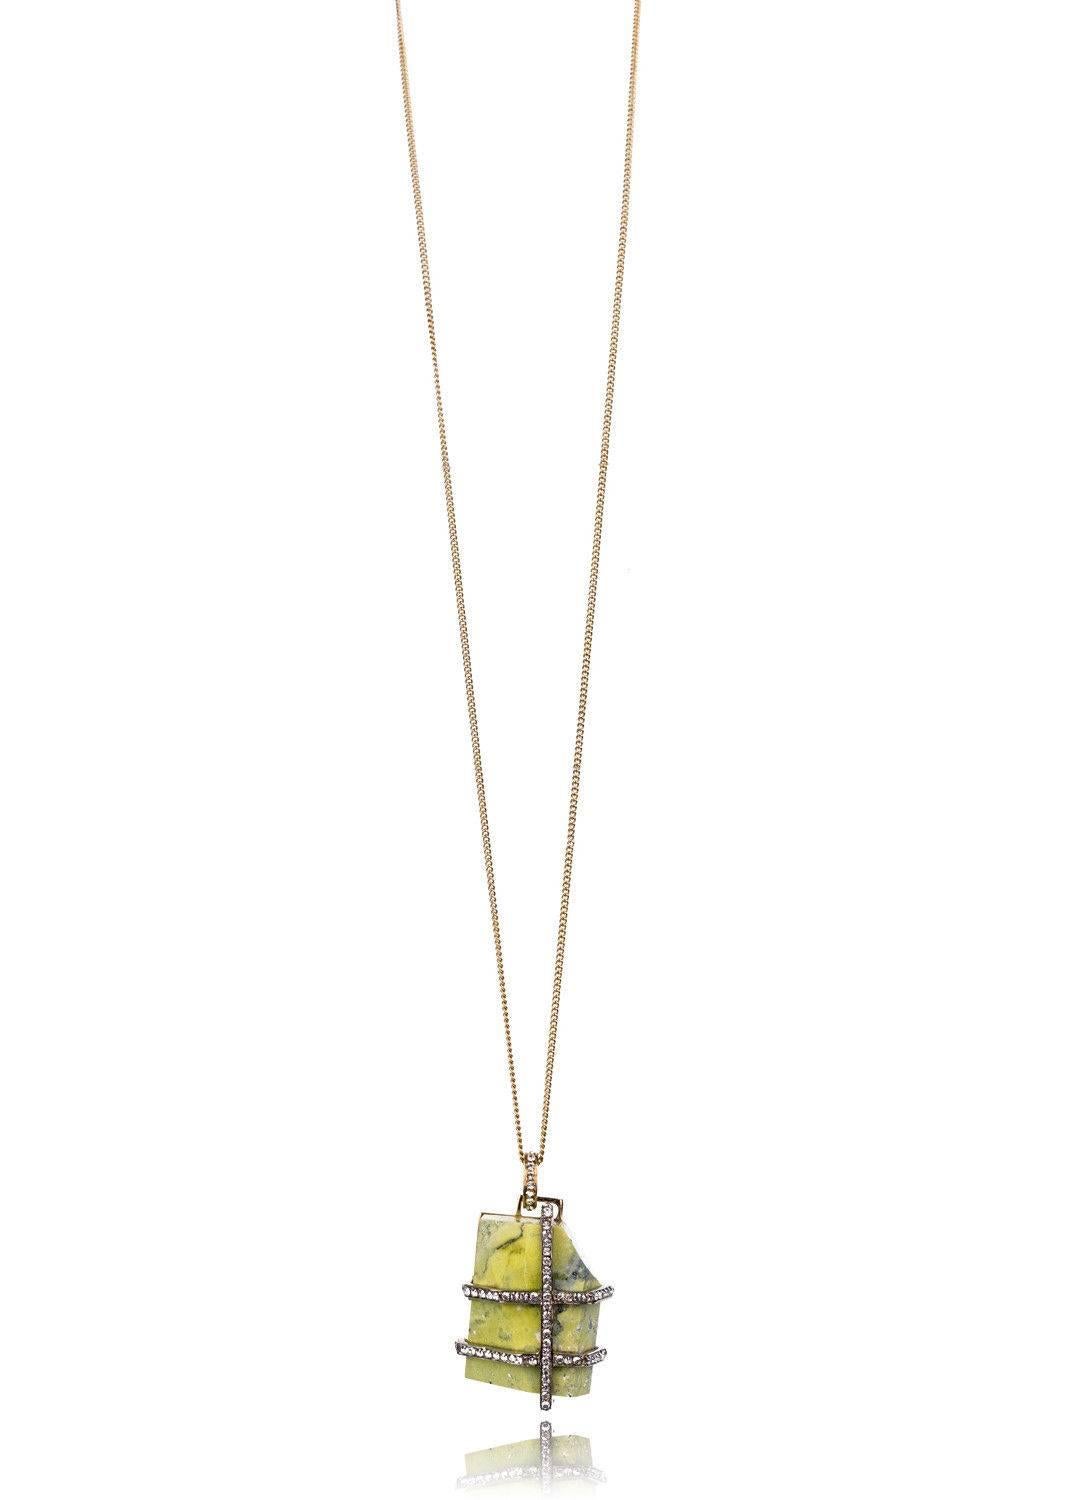 Roberto Cavalli's Green Marble necklace will be your calming earthy accessory of the day. This necklace features a faintly luminous green marble stone, Swavorski Crystal accents, and a bold gold frame. This thin gold tone chain adds a lightly casual